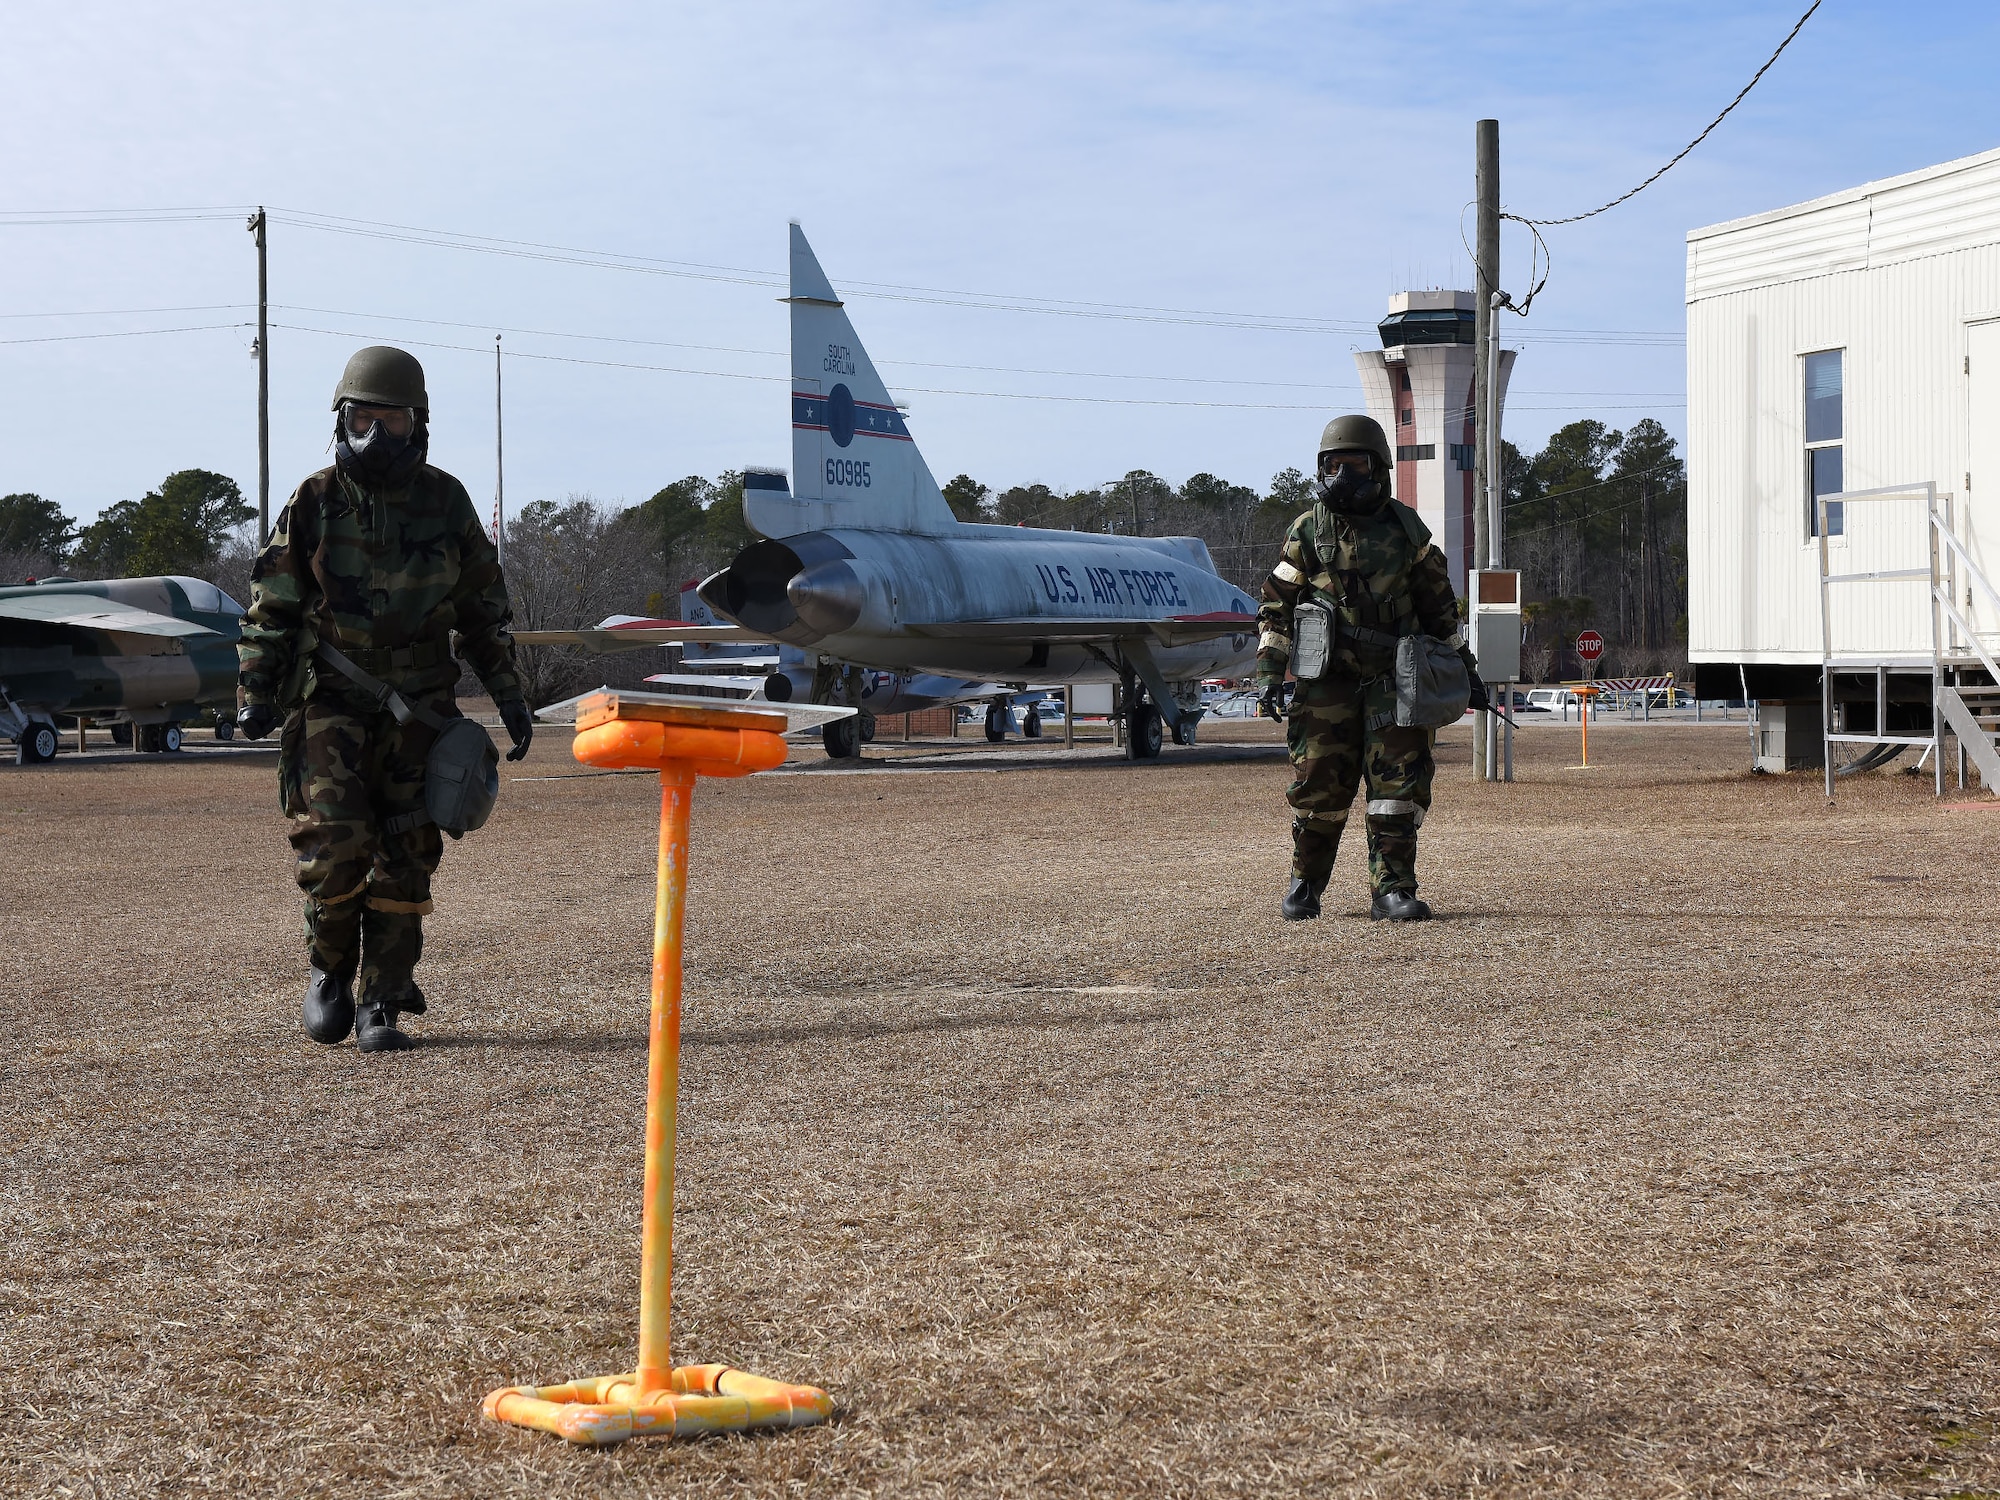 U.S. Air Force Airmen, assigned to the South Carolina Air National Guard’s 169th Fighter Wing, perform yearly Task Qualification Training (TQT) during an Ability to Survive and Operate (ATSO) exercise at McEntire Joint National Guard Base, S.C., Feb. 3, 2018. Swamp Fox Airmen continue to hone routine skills to meet combatant command requirements. The muscle memory that is formed by using this equipment multiple times allows Airmen the ability to focus their attention on completing the mission under austere conditions. (U.S. Air National Guard photo by Senior Airman Ashleigh Pavelek)